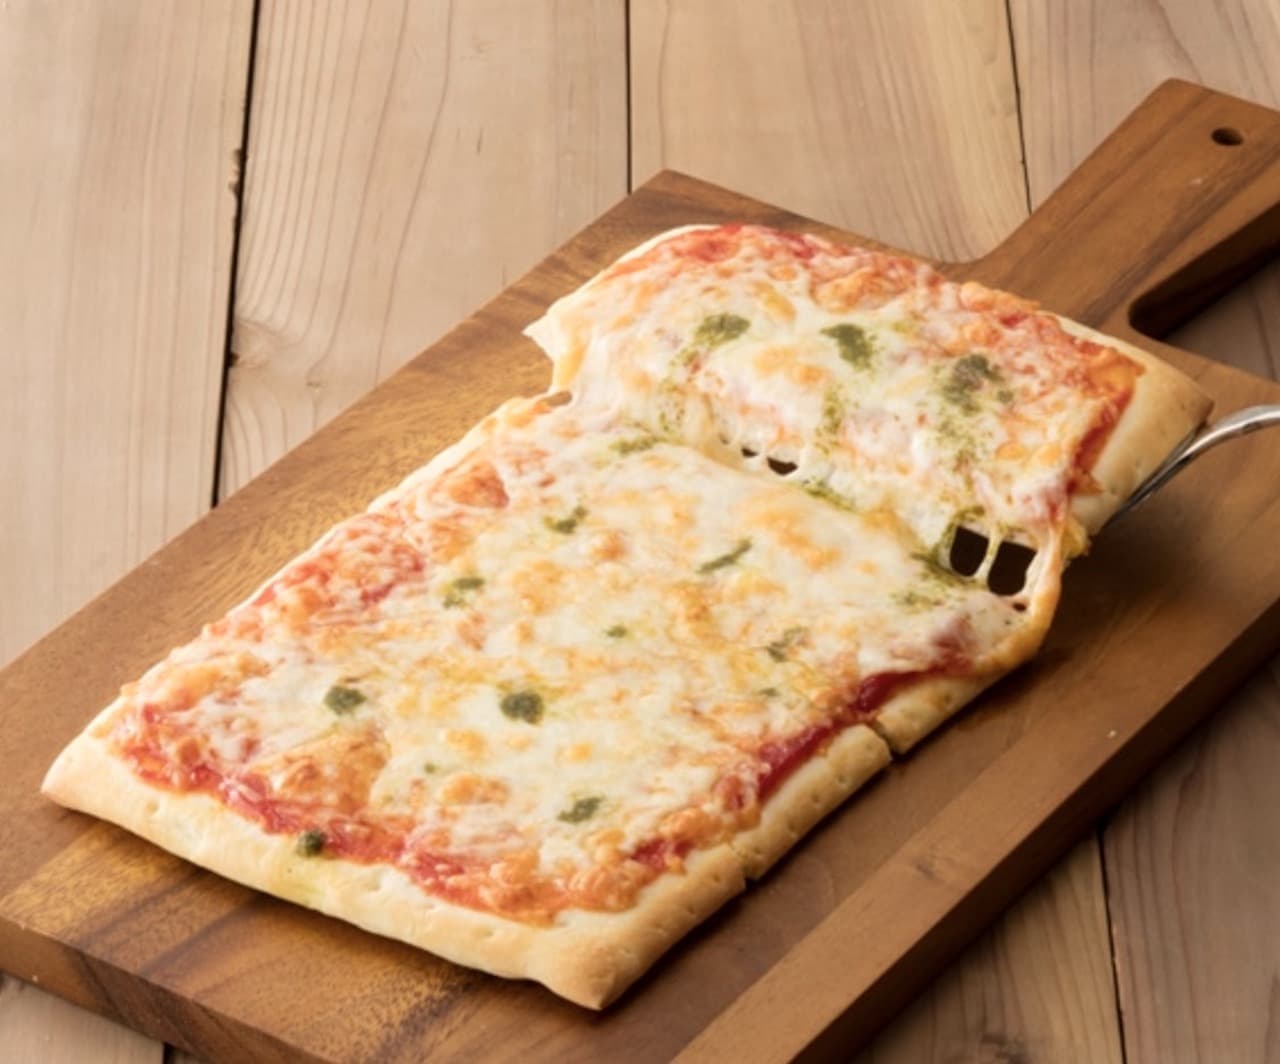 Chateraise "Pizza Margherita" that can be baked straight from the oven